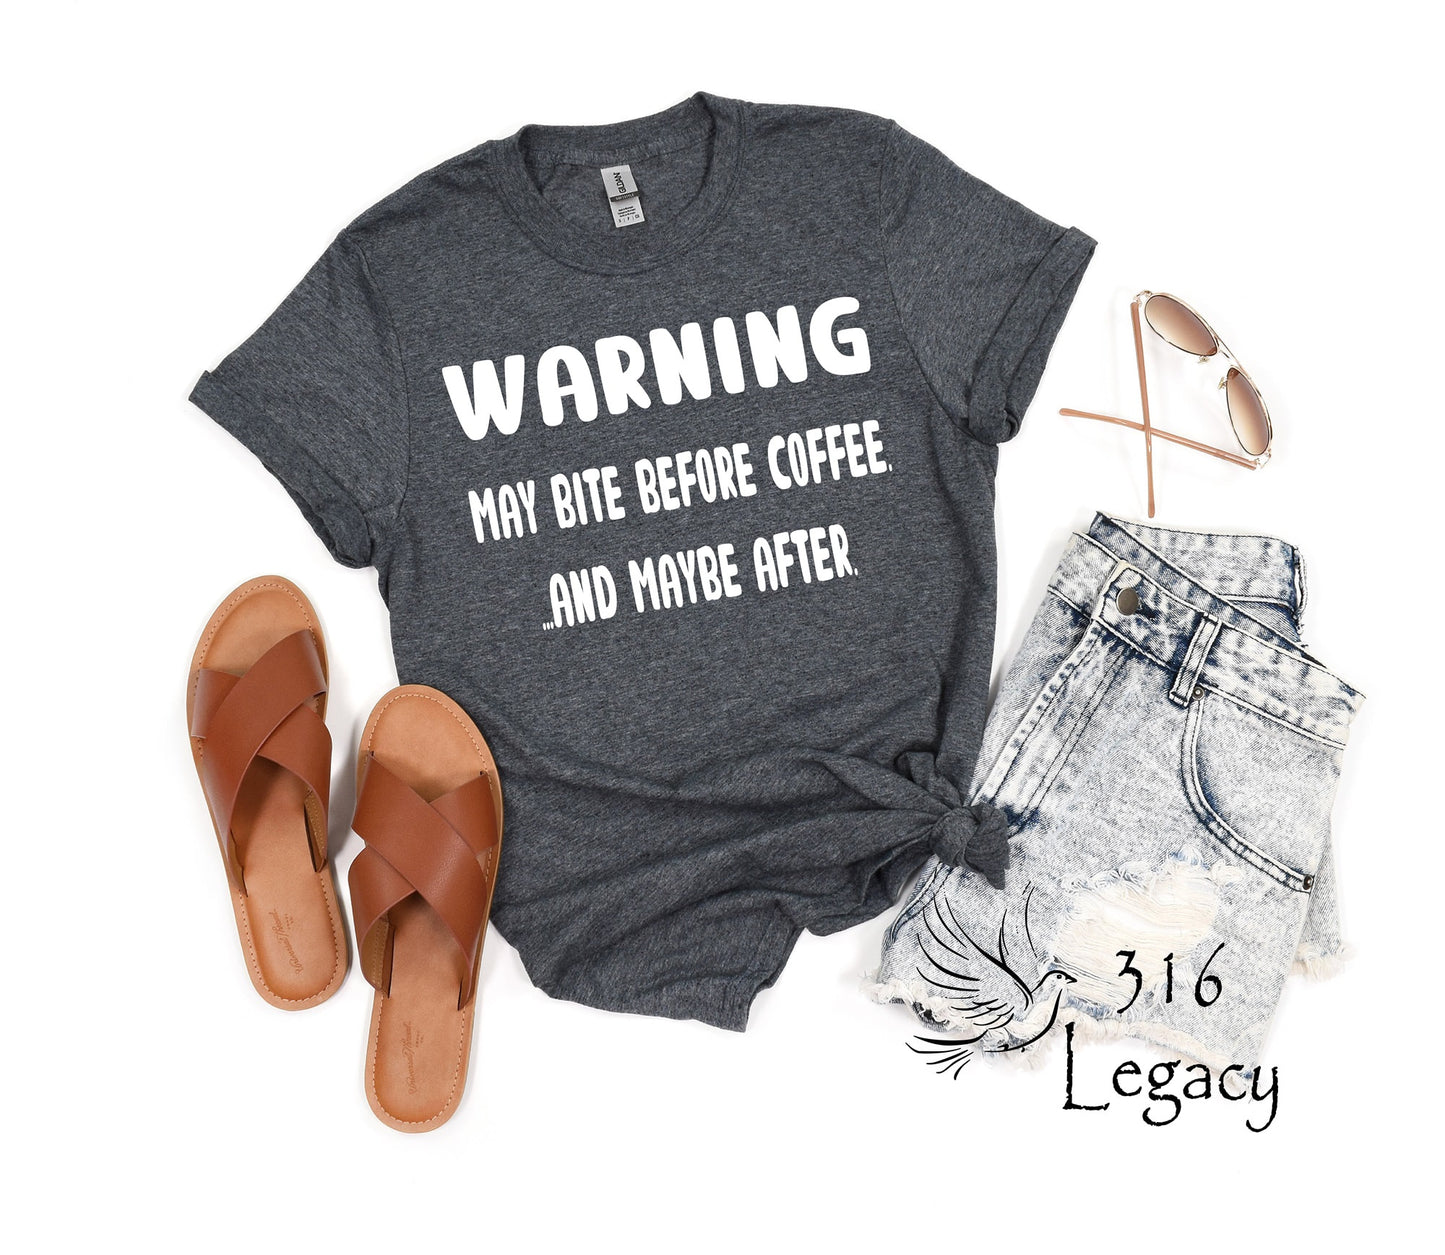 Bite Before Coffee T-shirt (Crew Neck or V-Neck) or Sweatshirt